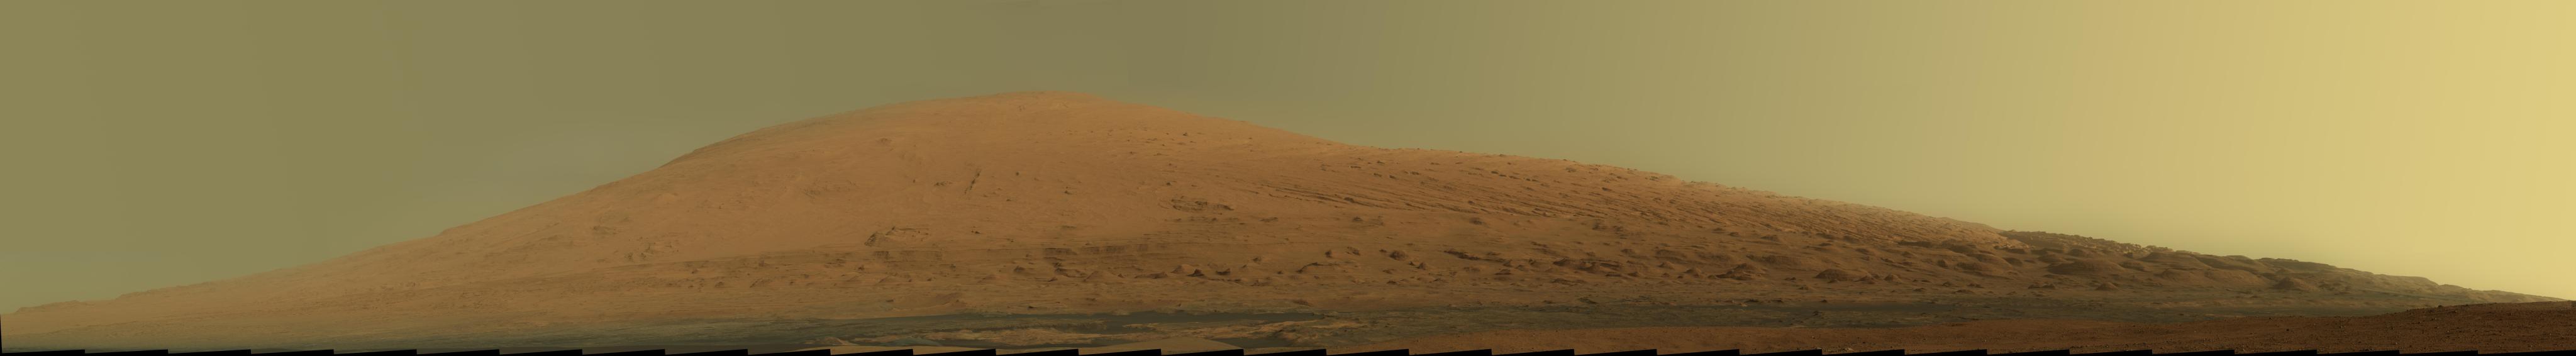 This mosaic of images from the Mast Camera (Mastcam) on NASA's Mars rover Curiosity shows Mount Sharp in raw color as recorded by the camera.